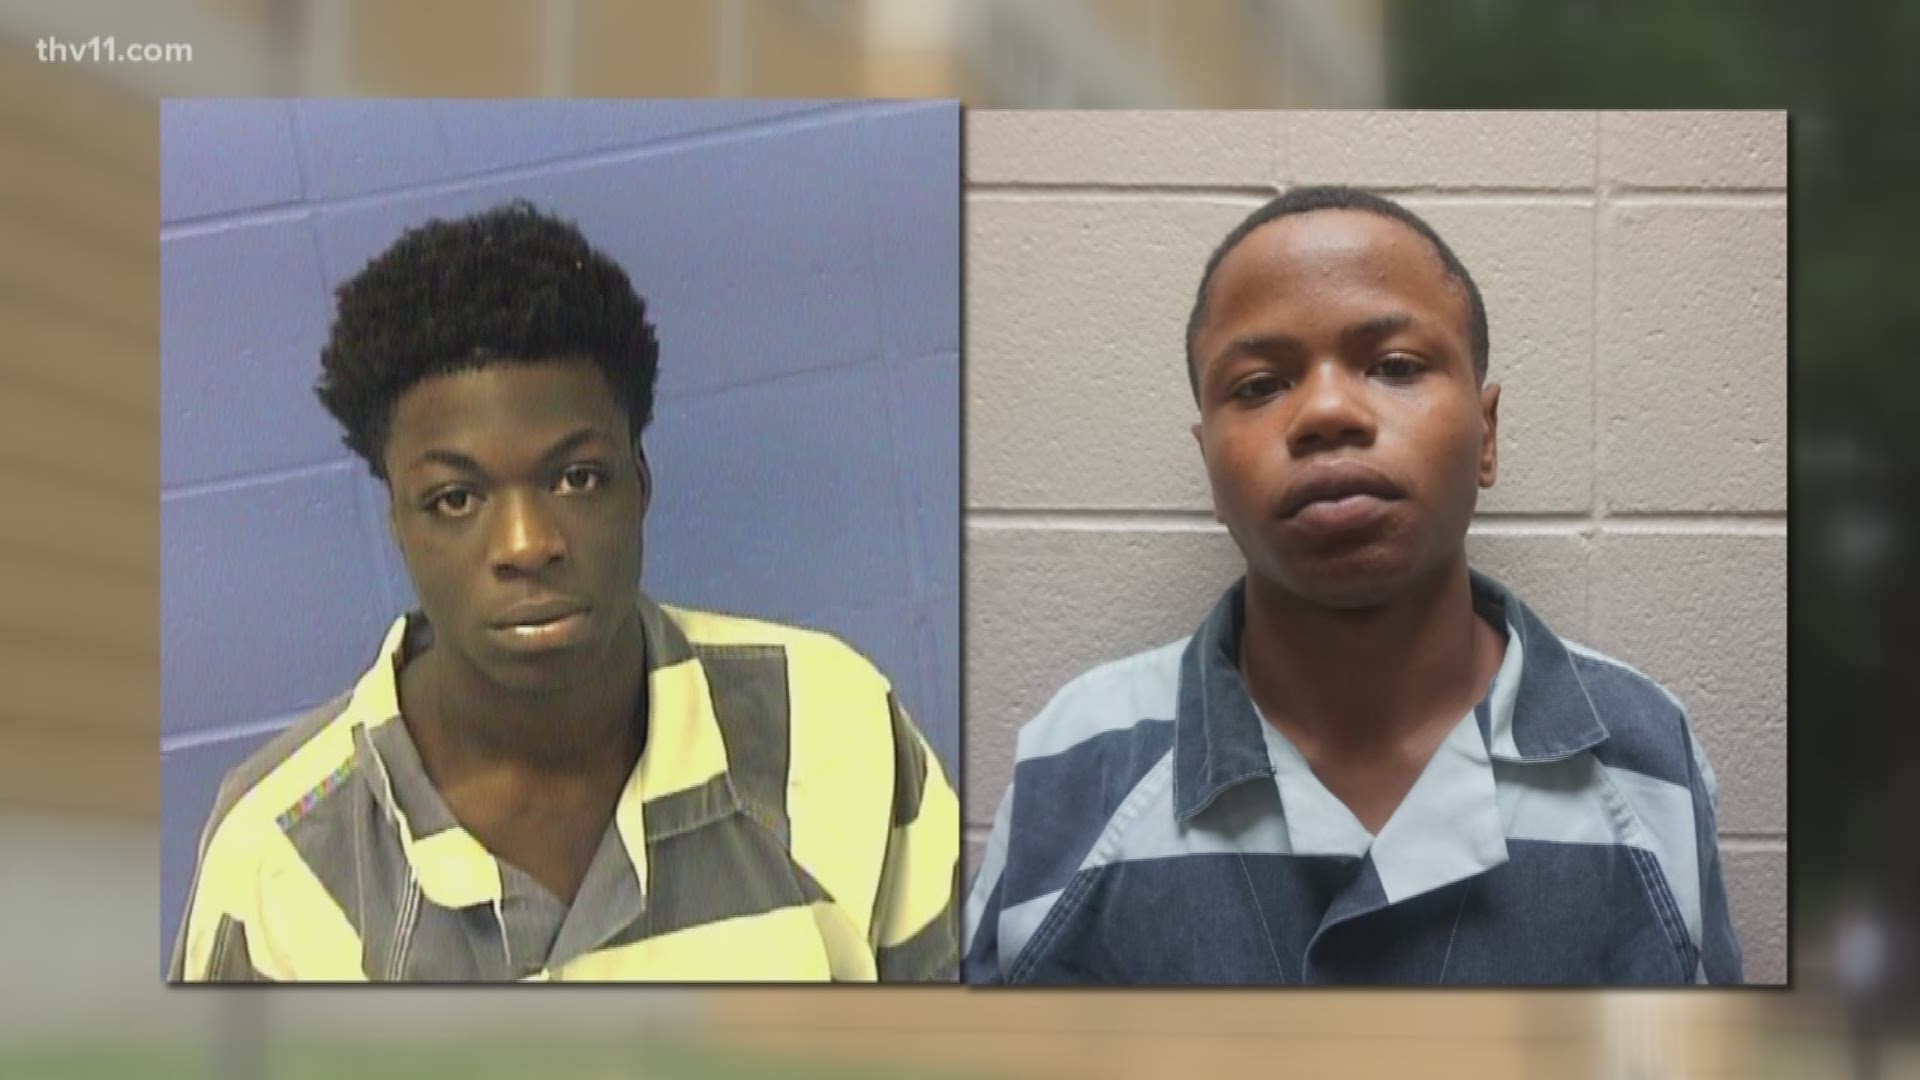 Though two suspects have been booked Faulkner County, several questions surrounding this case still remain unanswered.